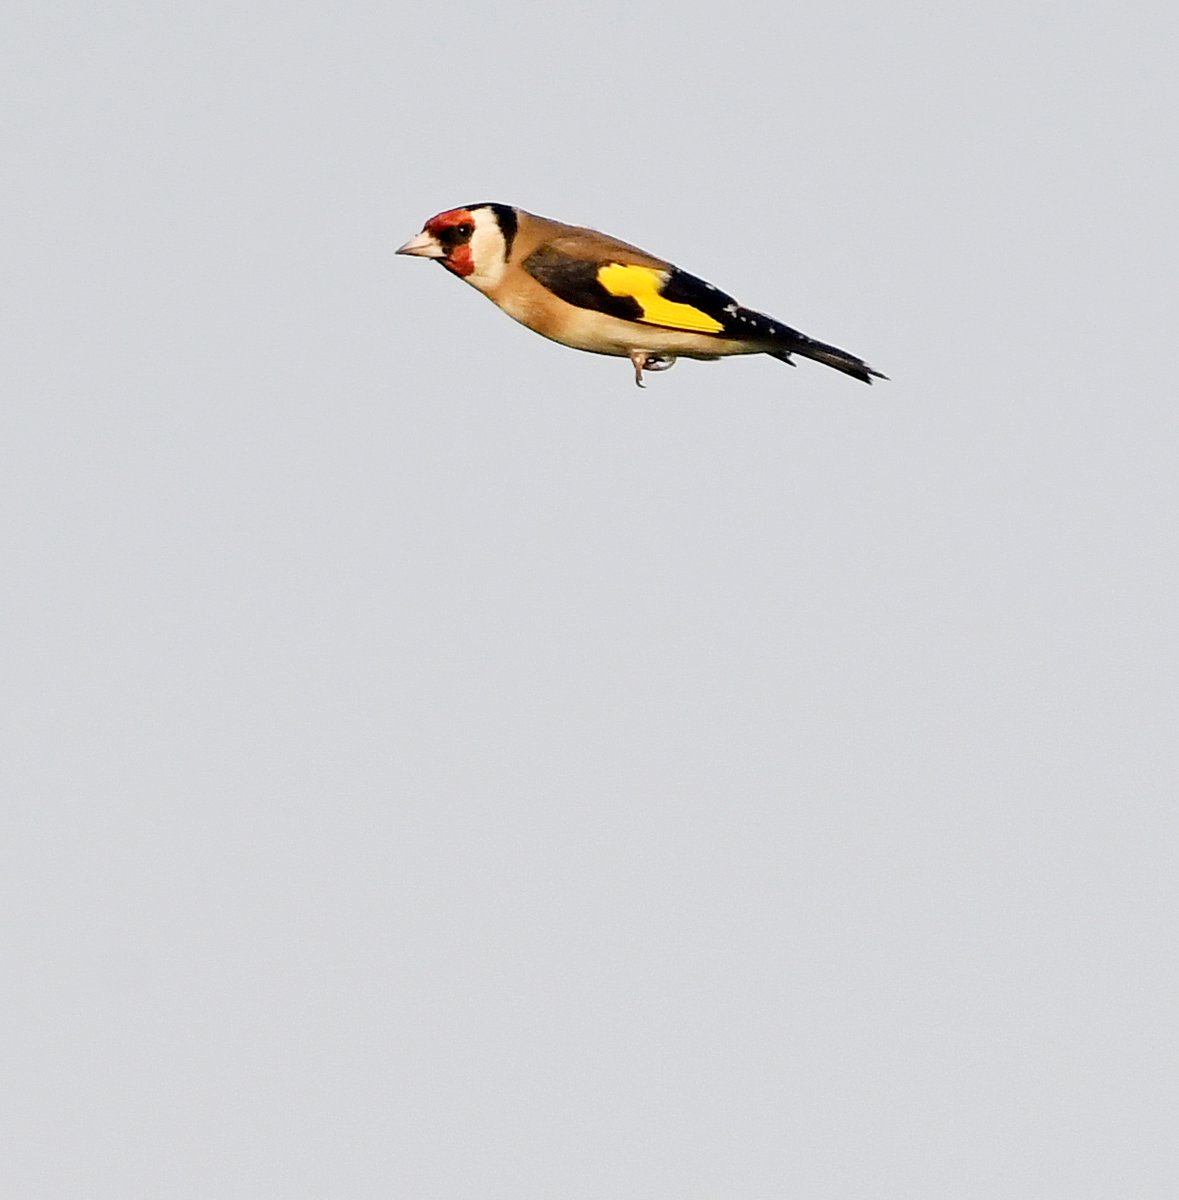 So there I was tonight, photographing Sparrowhawks here and Buzzards there, when my sneaky attackers thought they'd take advantage of my distraction and throw a Goldfinch at me! Luckily for me, they couldn't hit a barn door from 20 paces...  #TheDailyGoldfinch